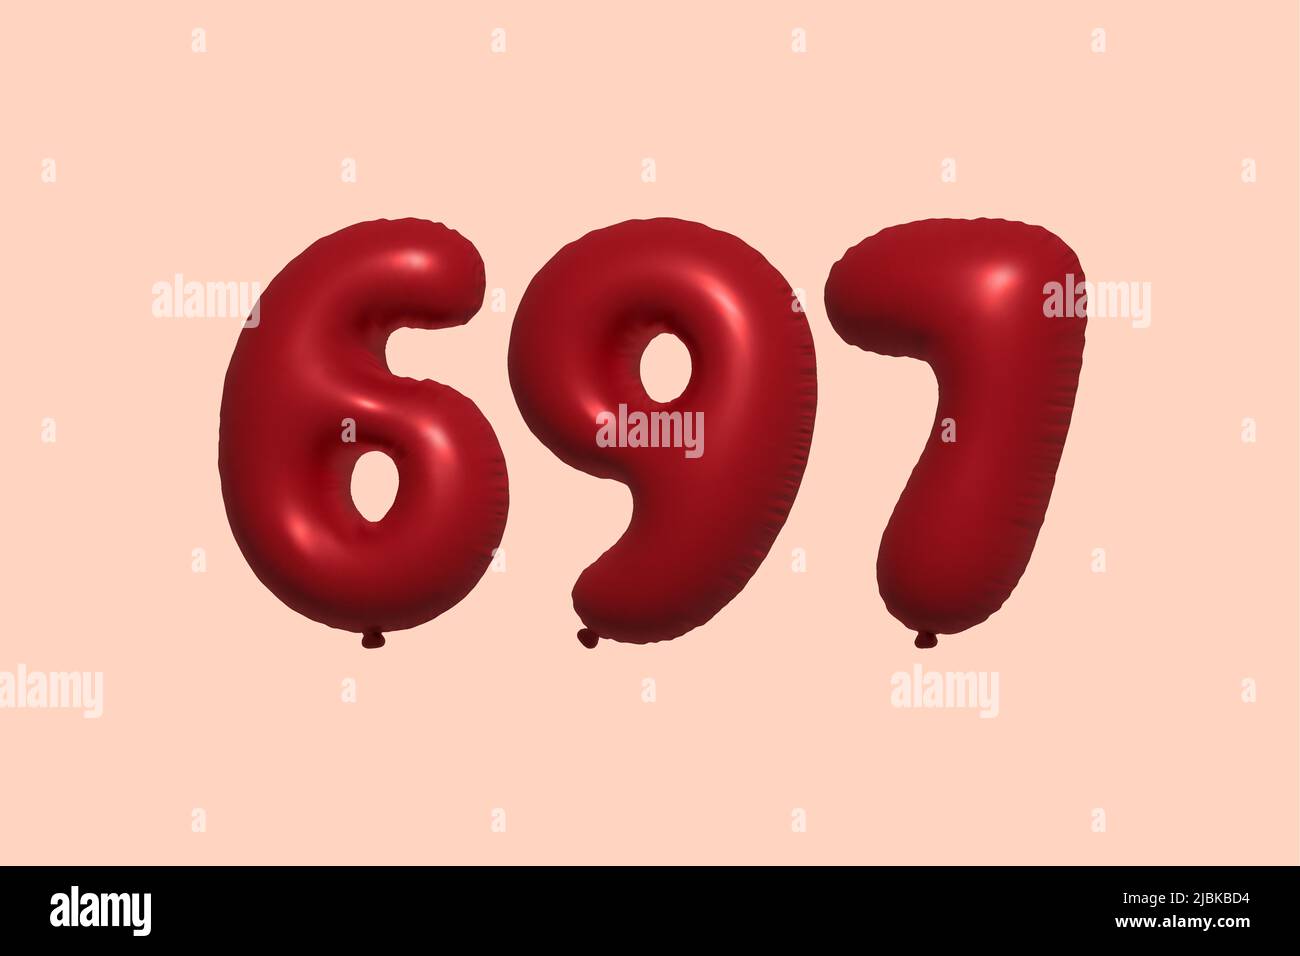 697 3d number balloon made of realistic metallic air balloon 3d rendering. 3D Red helium balloons for sale decoration Party Birthday, Celebrate anniversary, Wedding Holiday. Vector illustration Stock Vector